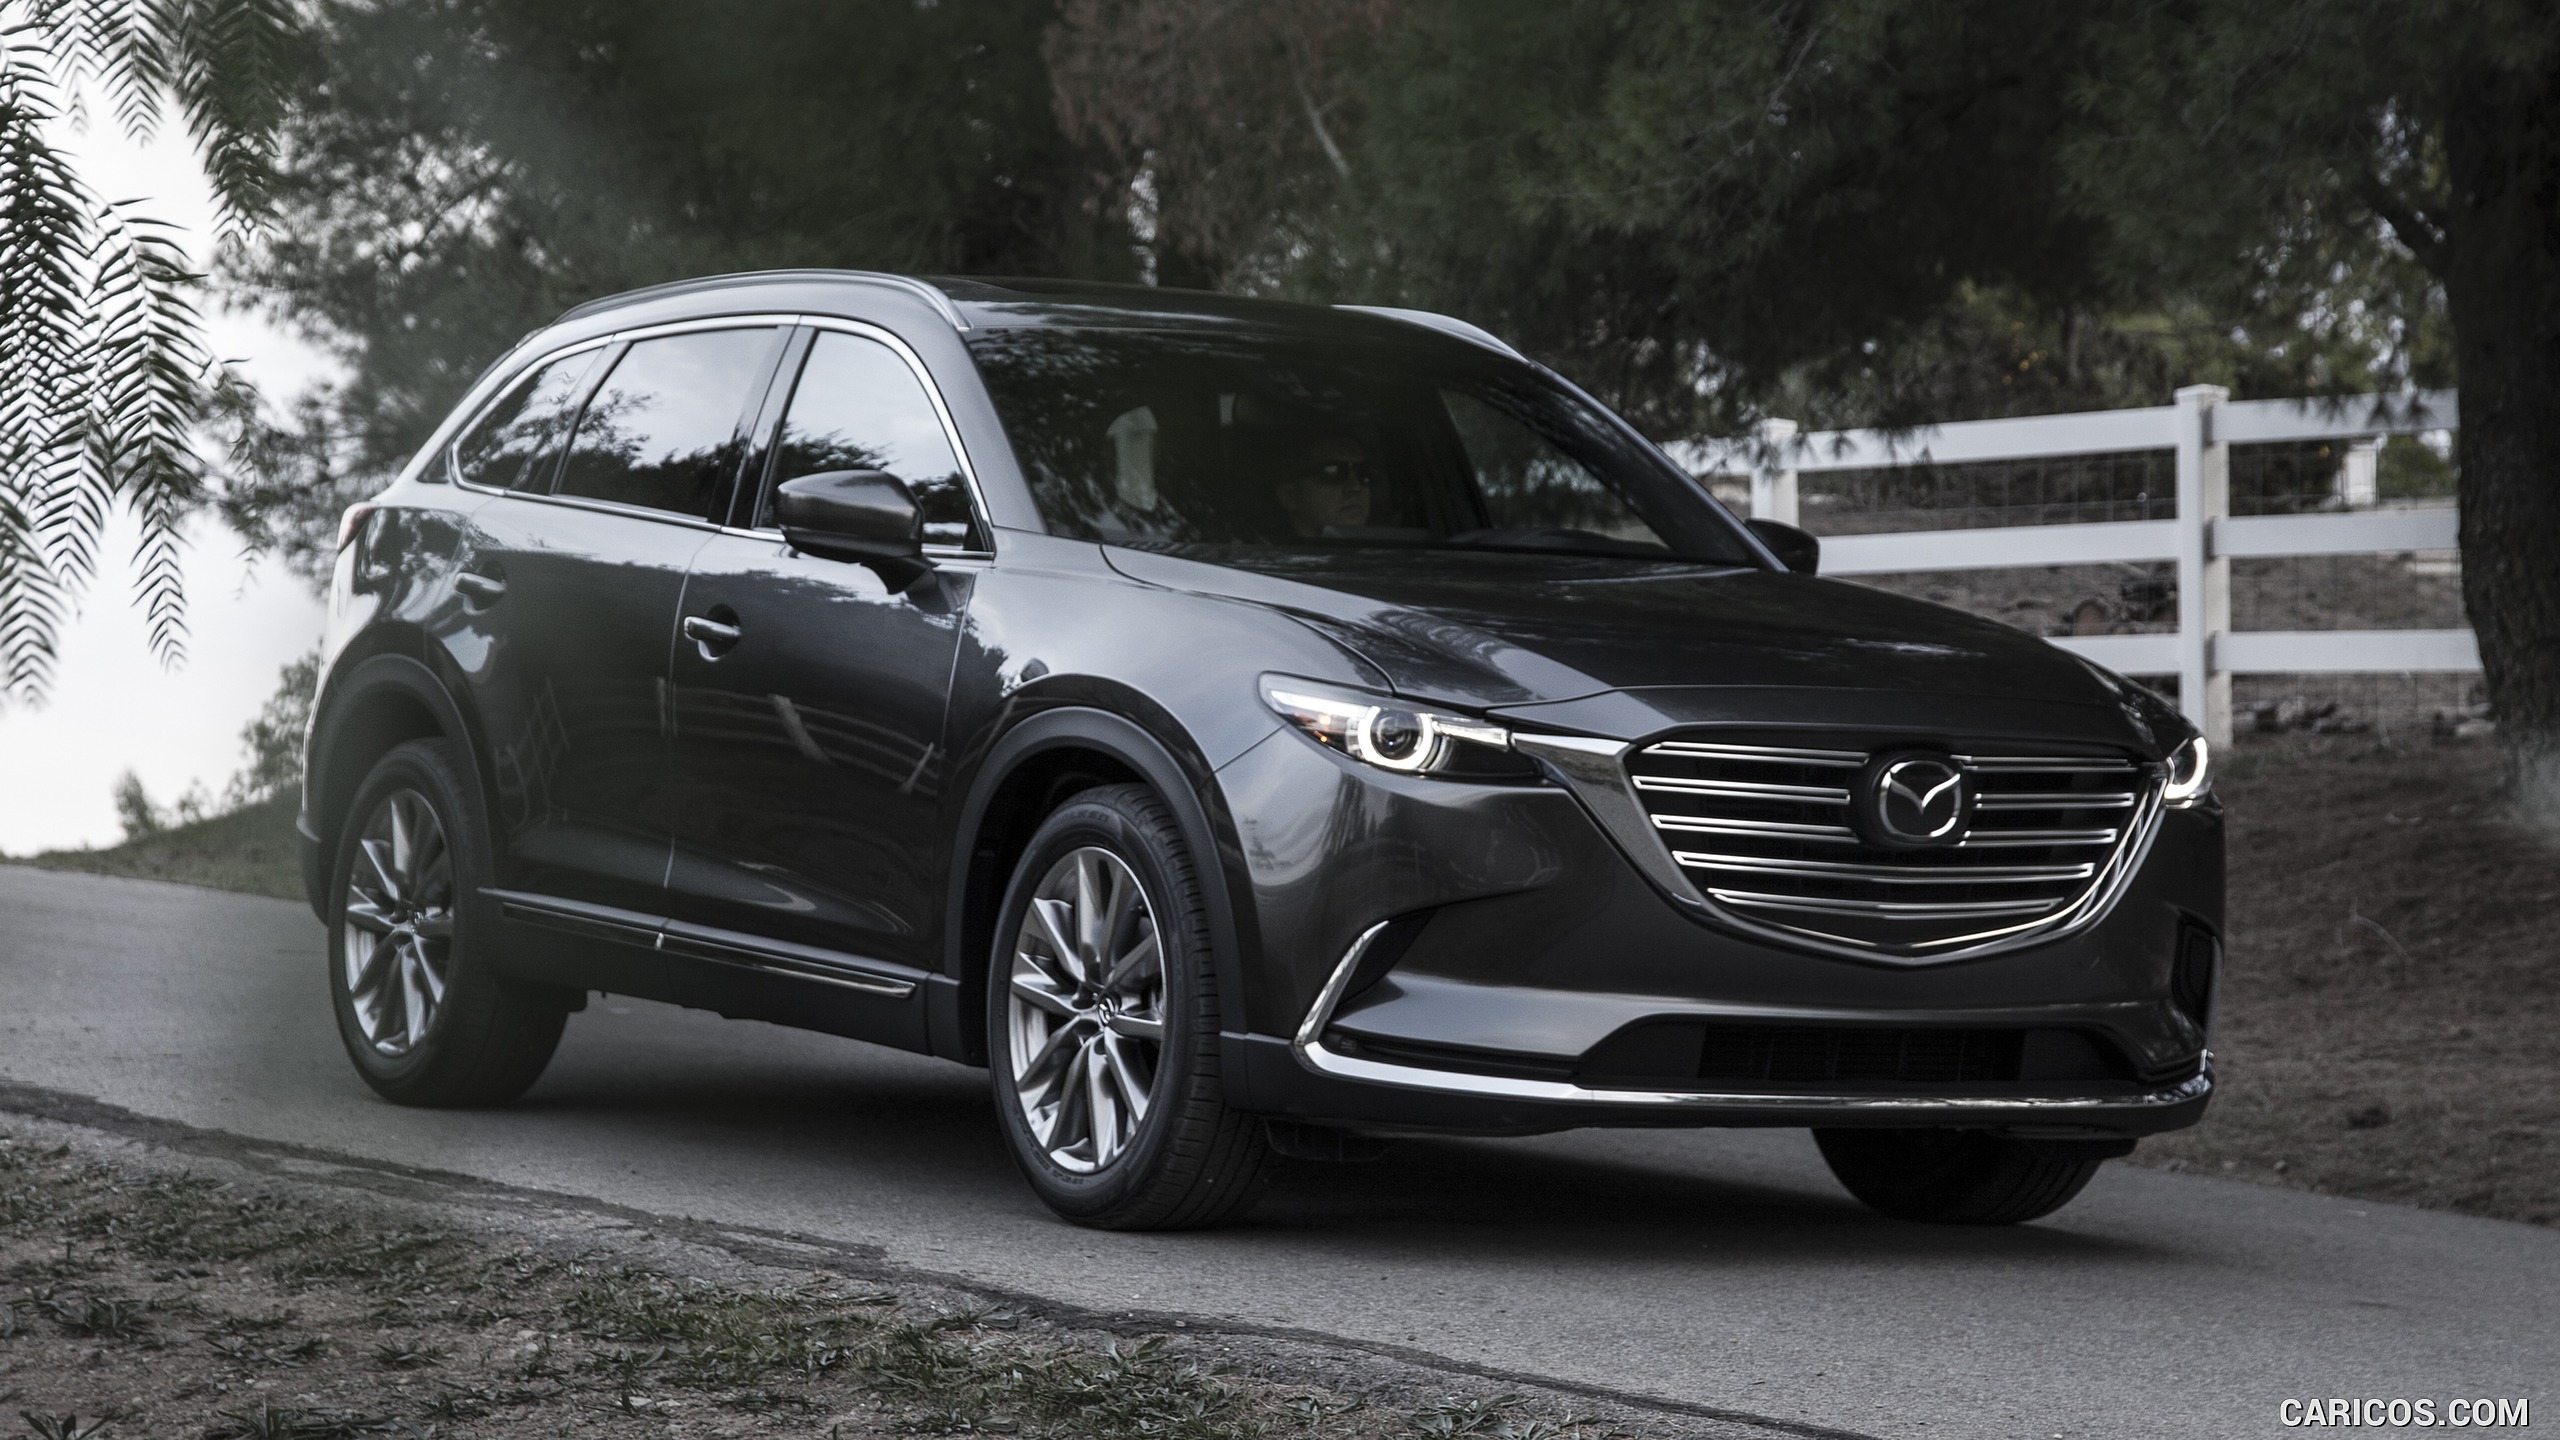 2016 Mazda CX-9 - Front, #6 of 69